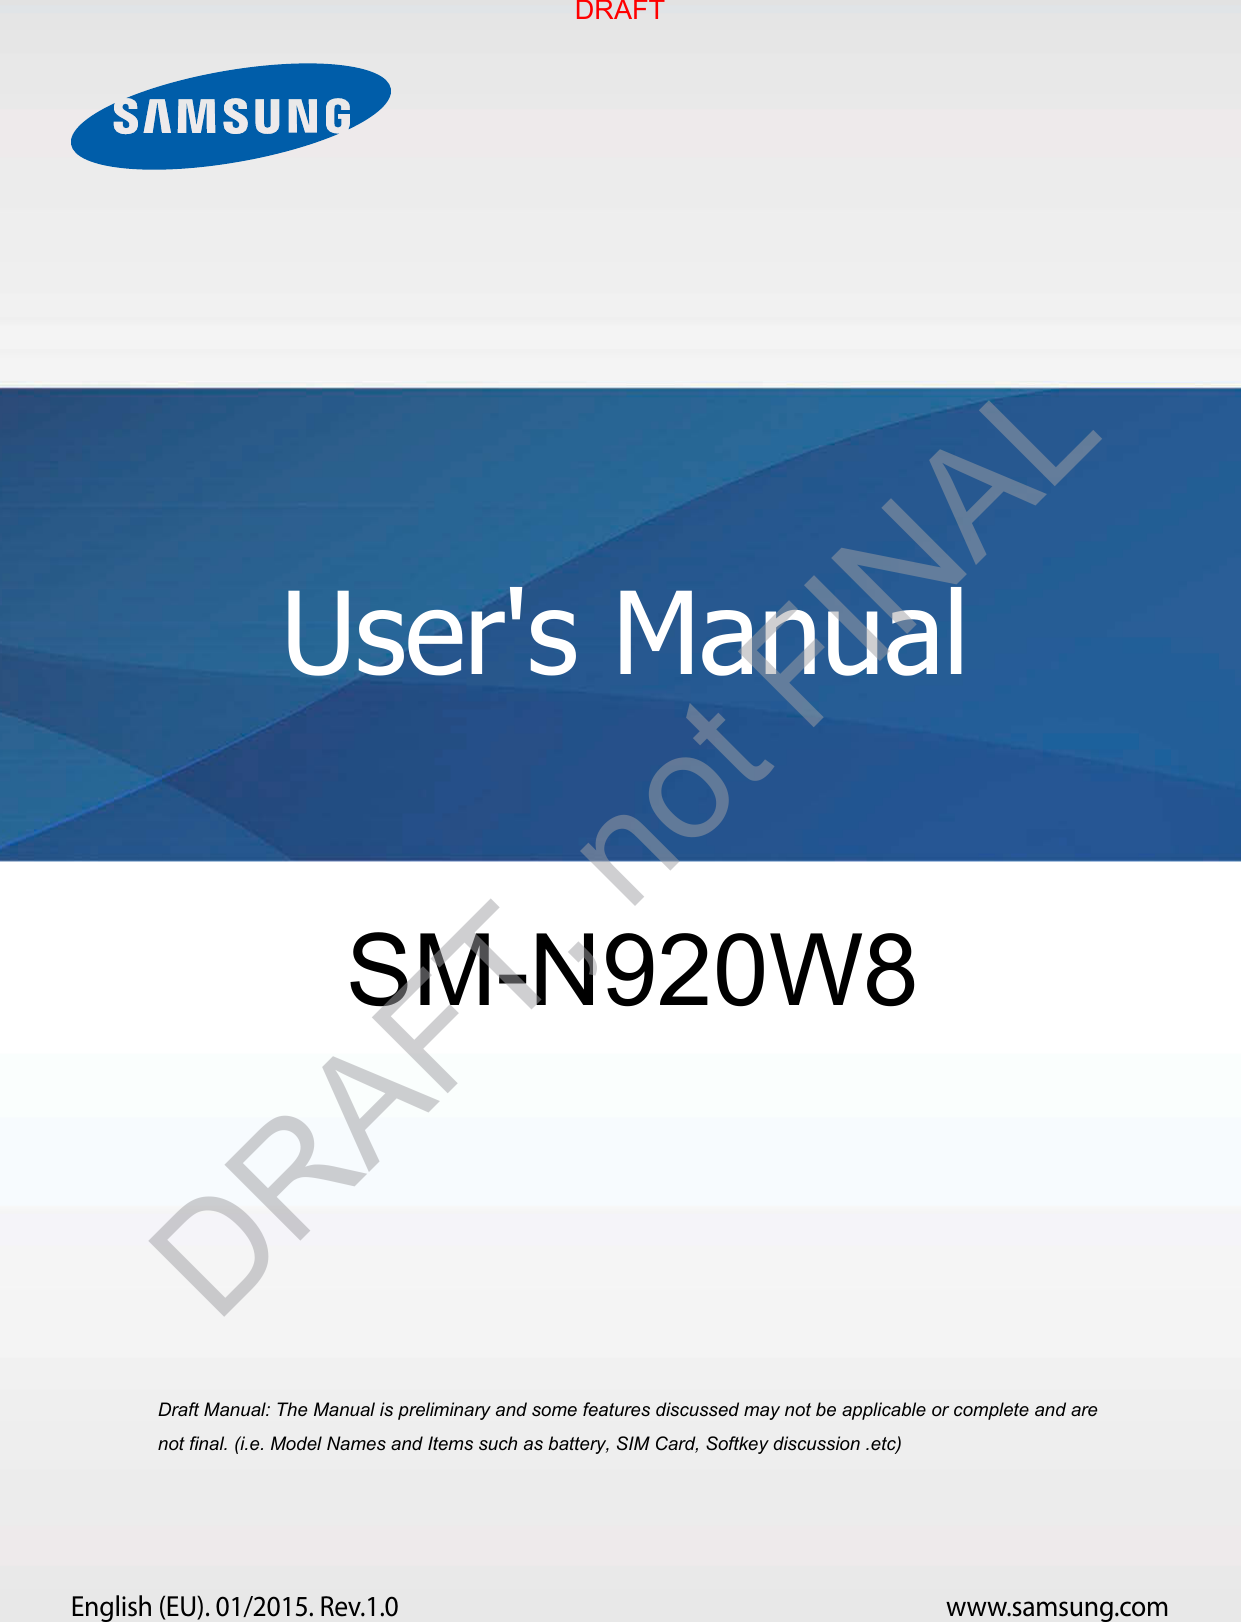 www.samsung.comUser&apos;s ManualEnglish (EU). 01/2015. Rev.1.0a ana  ana  na and  a dd a n  aa   and a n na  d a and   a a  ad  dn SM-N920W8 DRAFTDRAFT, not FINAL